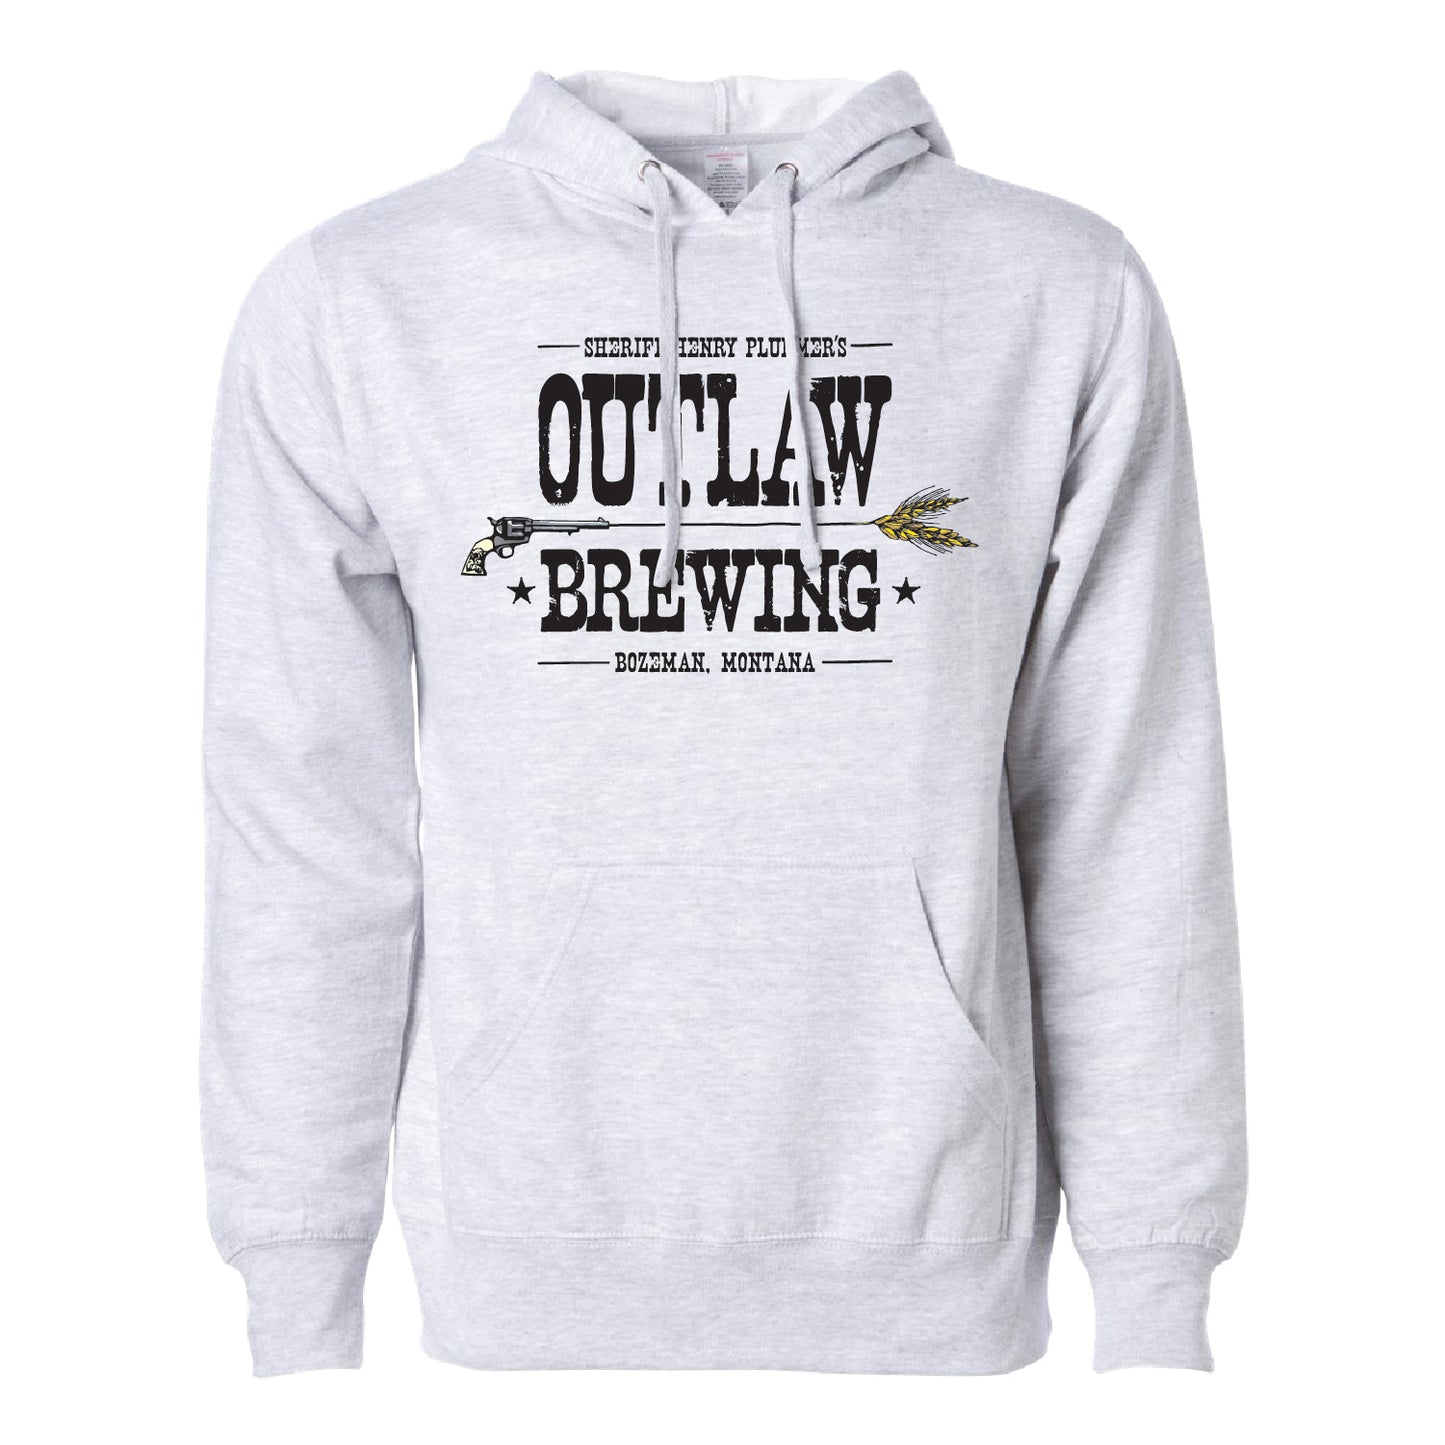 Outlaw Brewing Unisex Midweight Hooded Sweatshirt 2